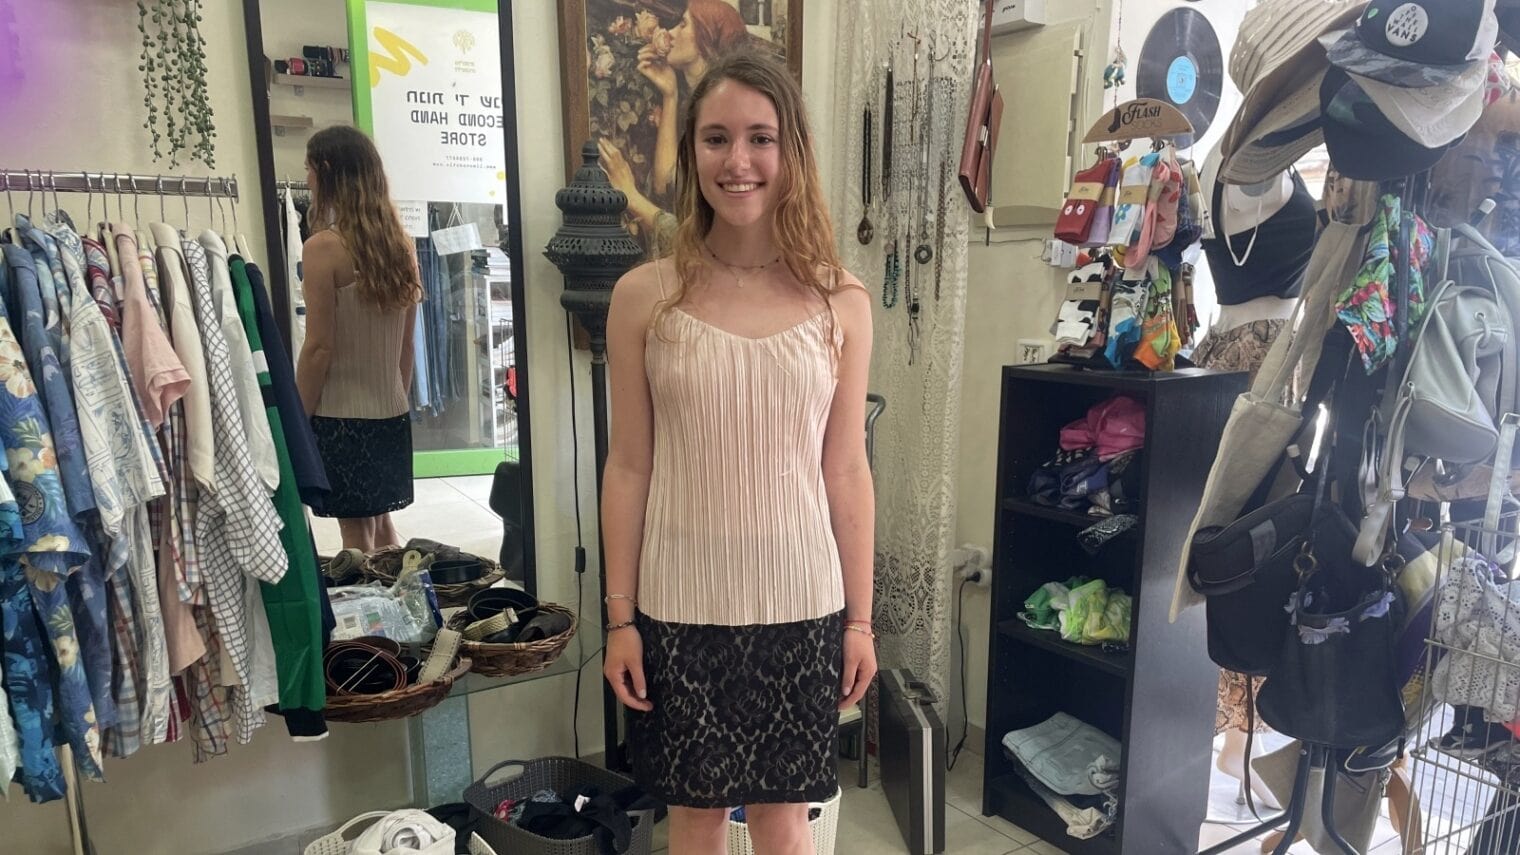 Rachel Fisher modeling an outfit at Limonada thrift shop. Photo by Jeanette Shine